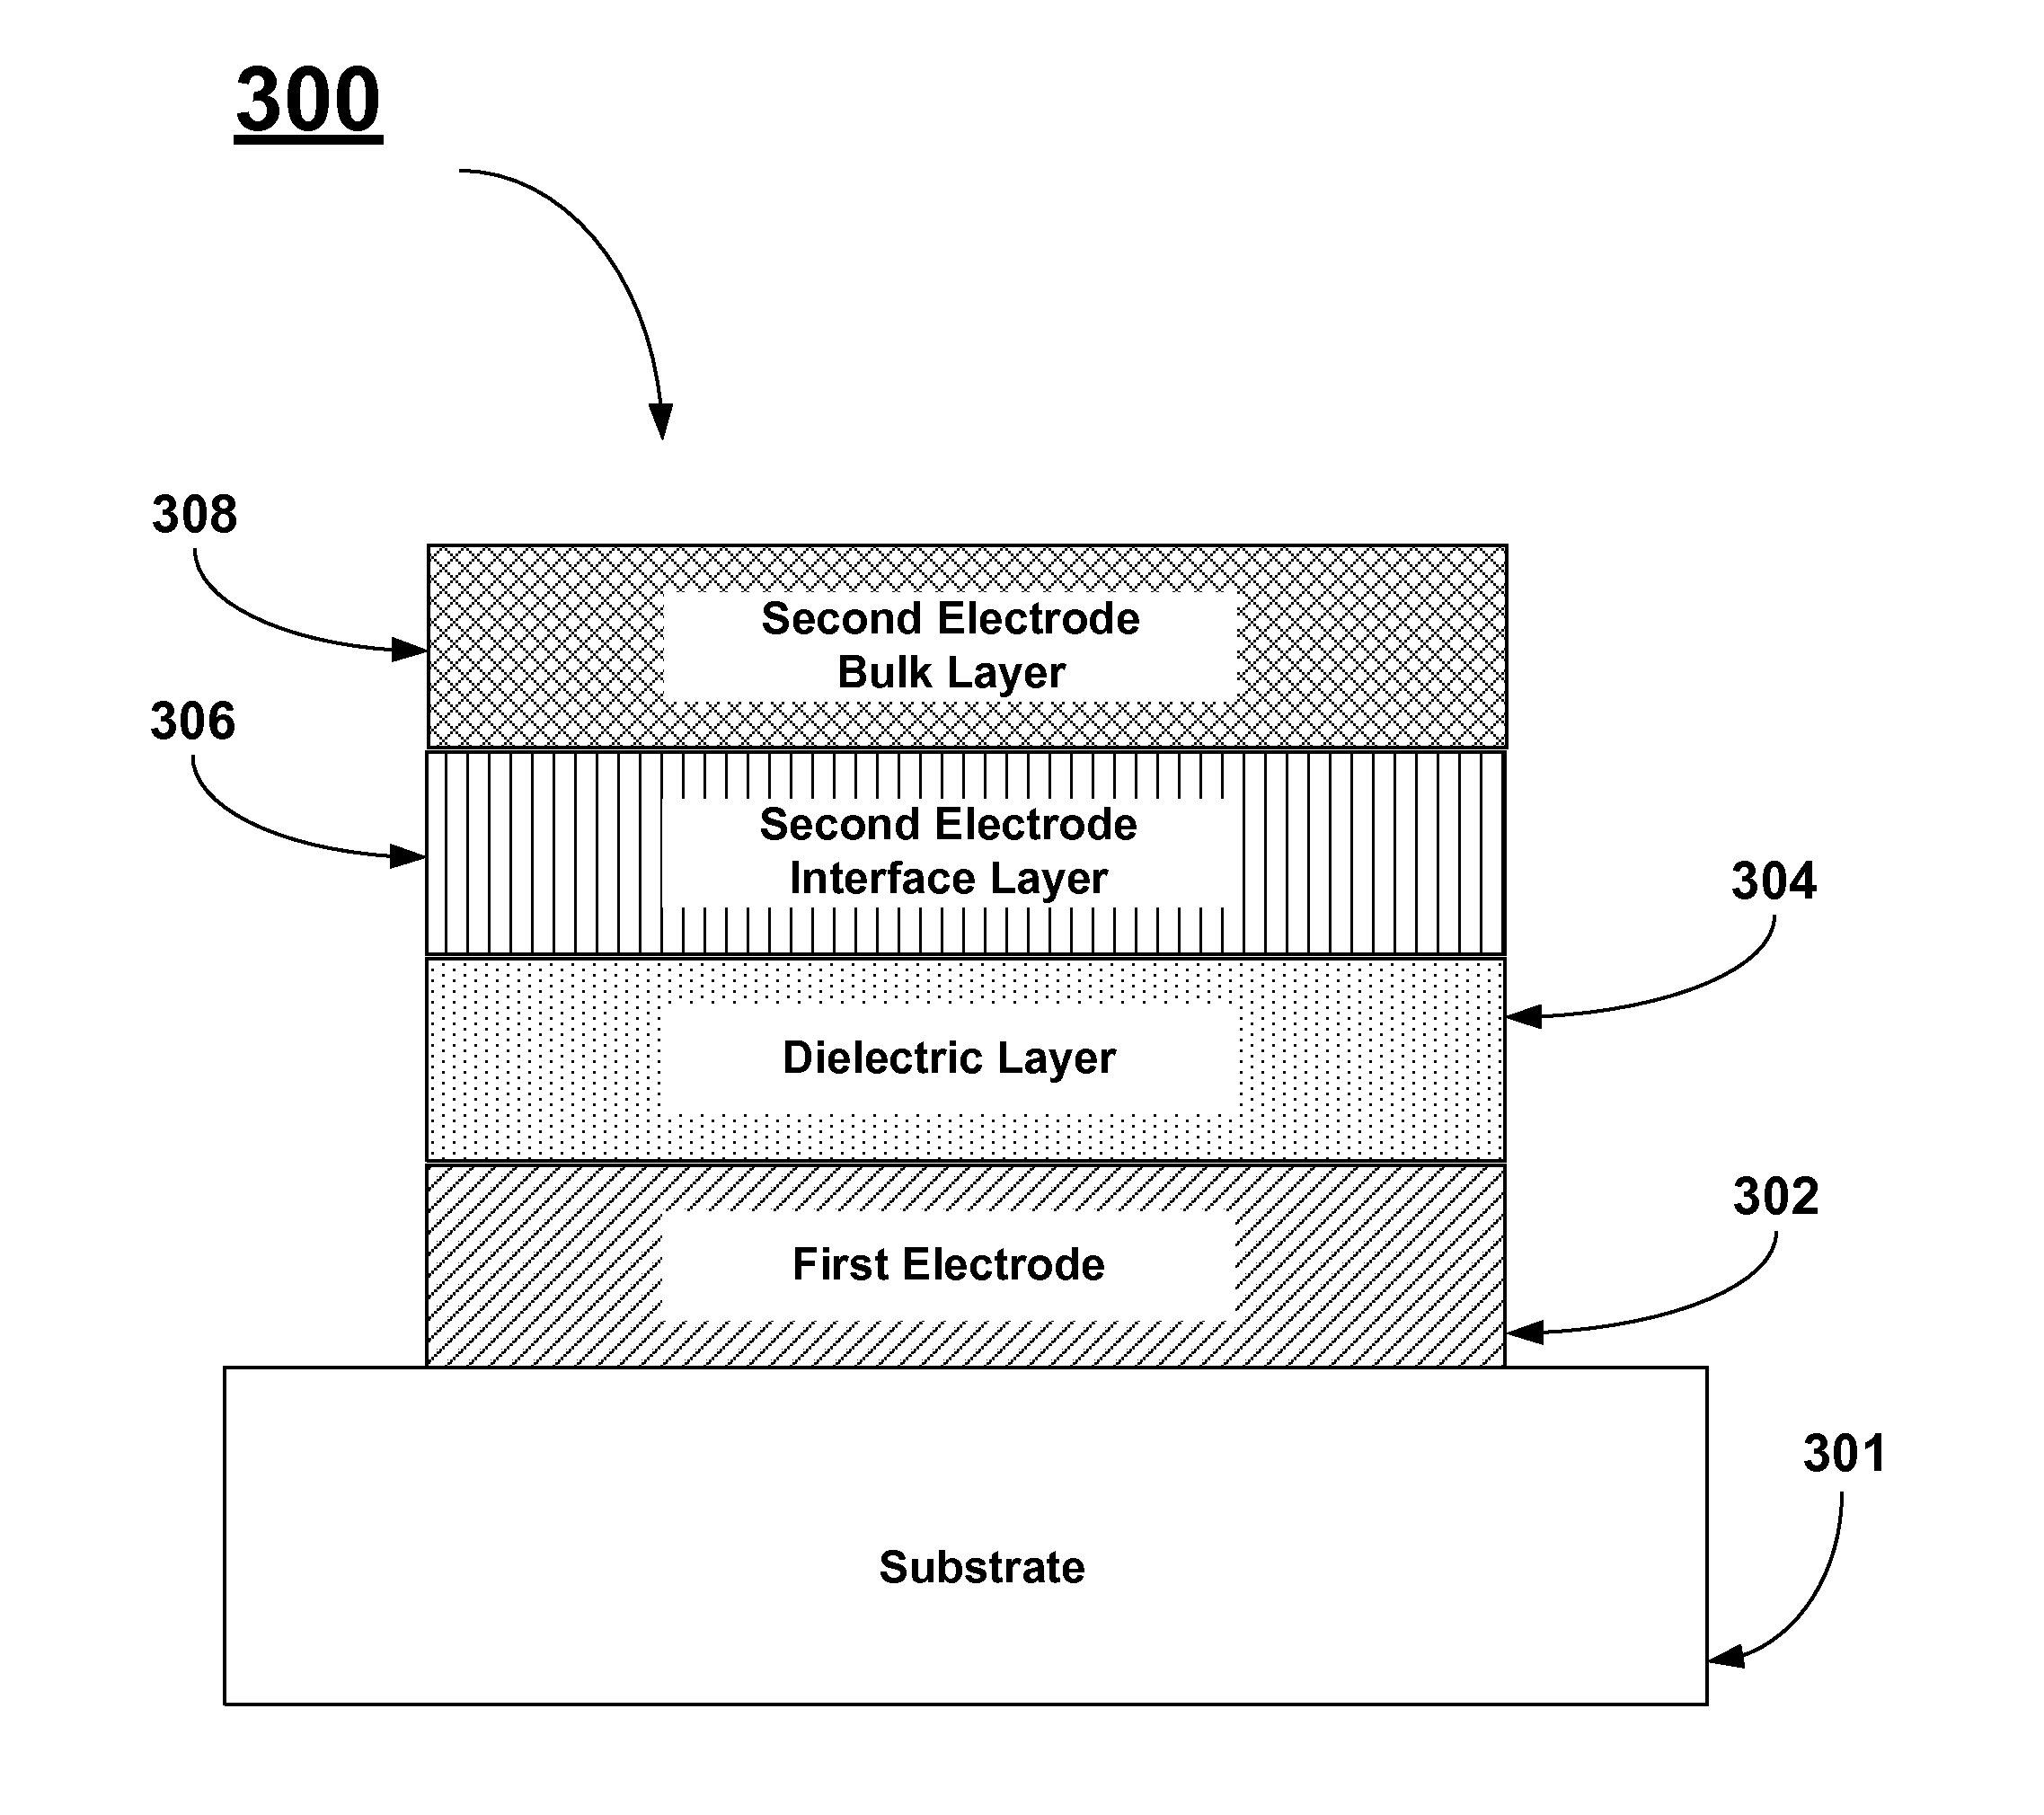 Top electrode templating for DRAM capacitor